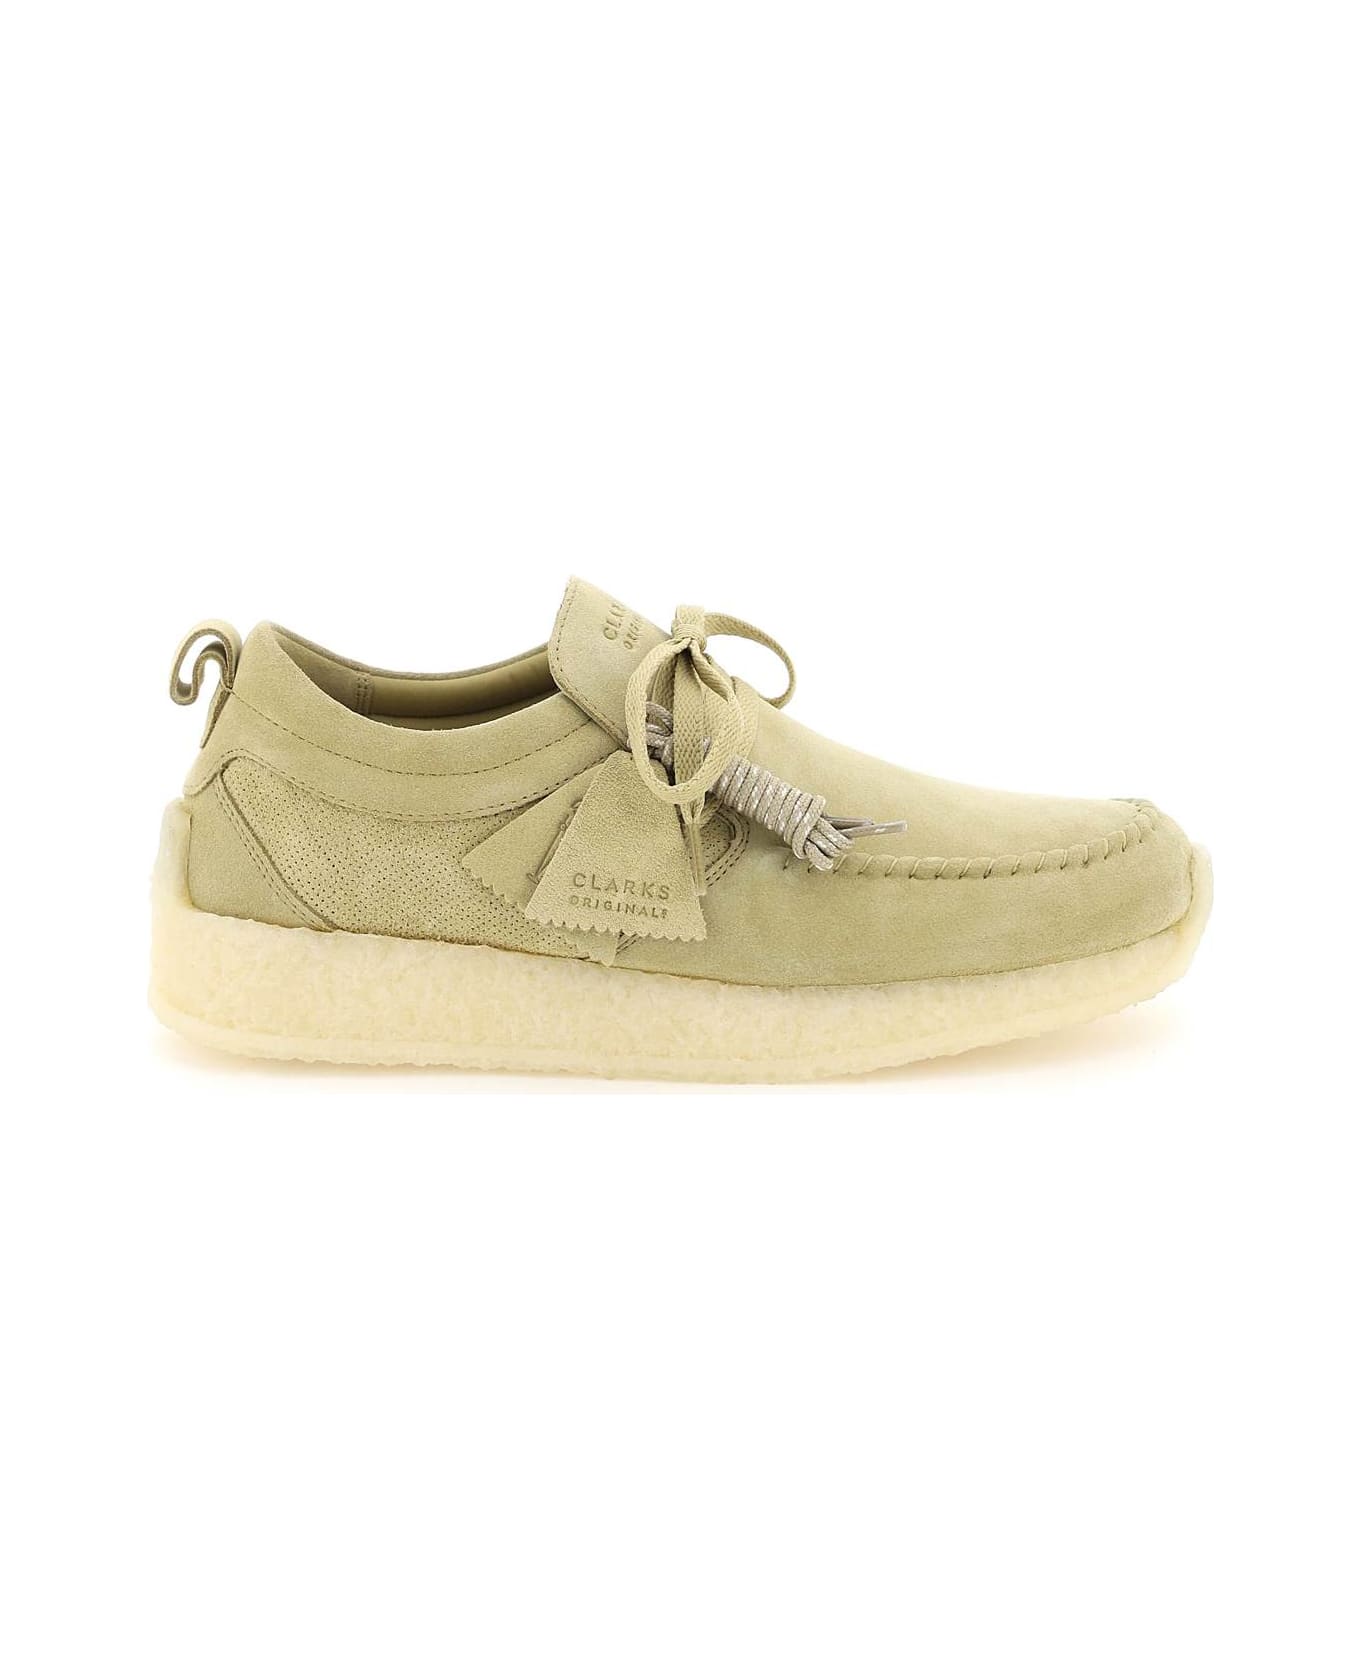 Clarks 'maycliffe' Lace-up Shoes - MAPLE (Beige) レースアップシューズ